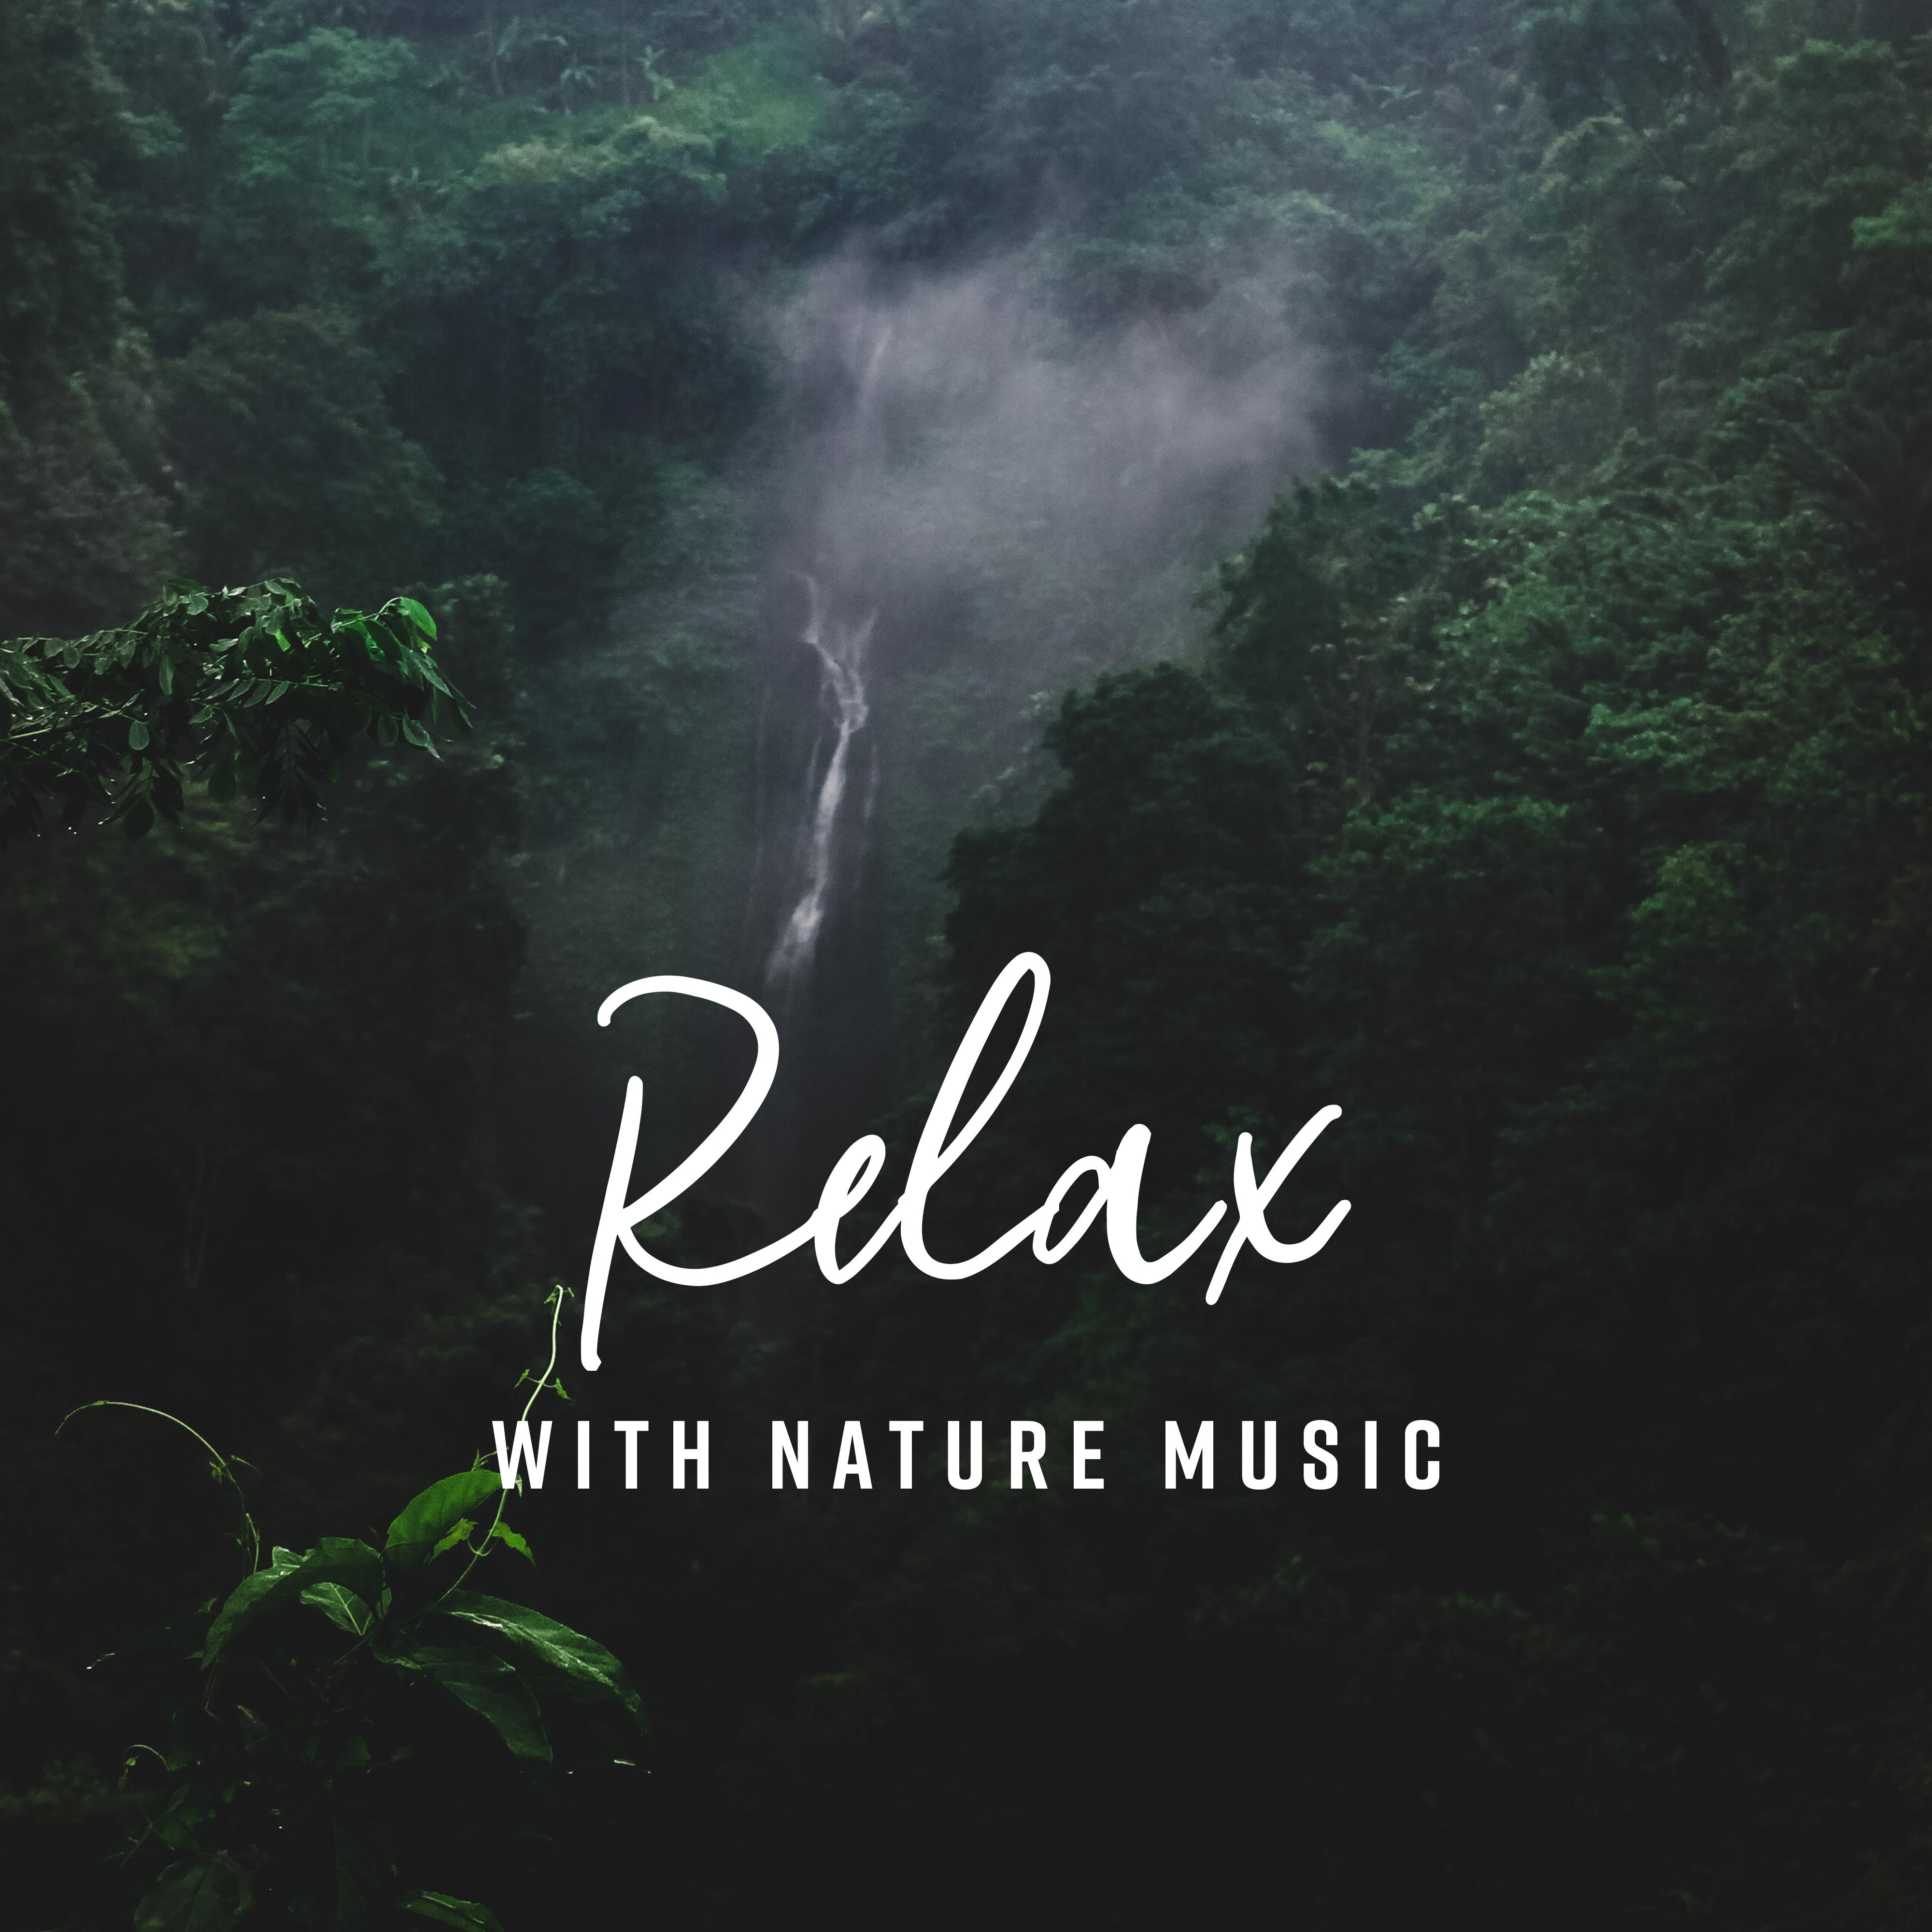 Relax with Nature Music – Relaxing Music Therapy, Stress Relief, 15 Nature Sounds for Sleep, Inner Balance, Full Concentration, Zen, Sounds of Nature